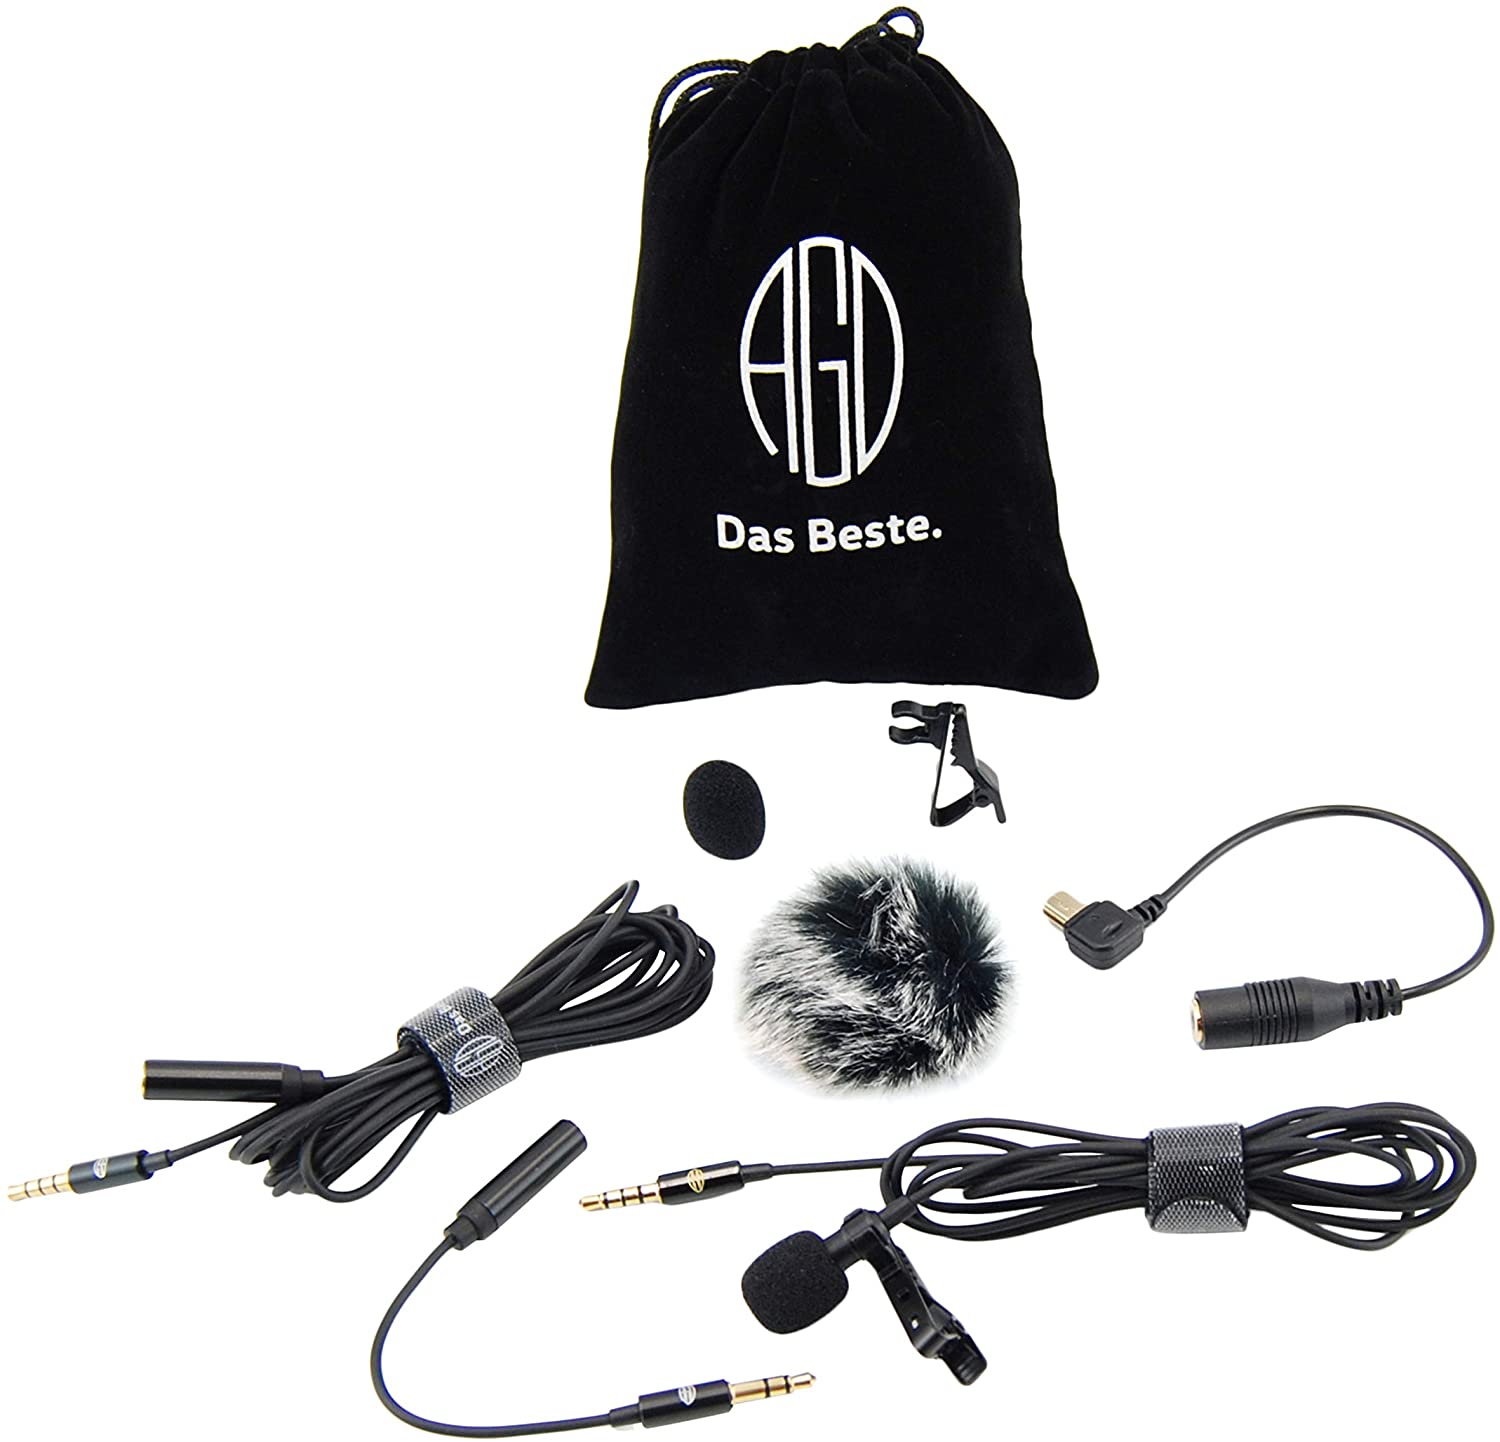 AGD Lavalier Lapel Microphone Kit Clip-on Omnidirectional Condenser Lav  Mic Compatible with iPhone, iPad, GoPro, DSLR, Camcorder, Zoom Audio  Recorder, PC, MacBook, Android, PS4